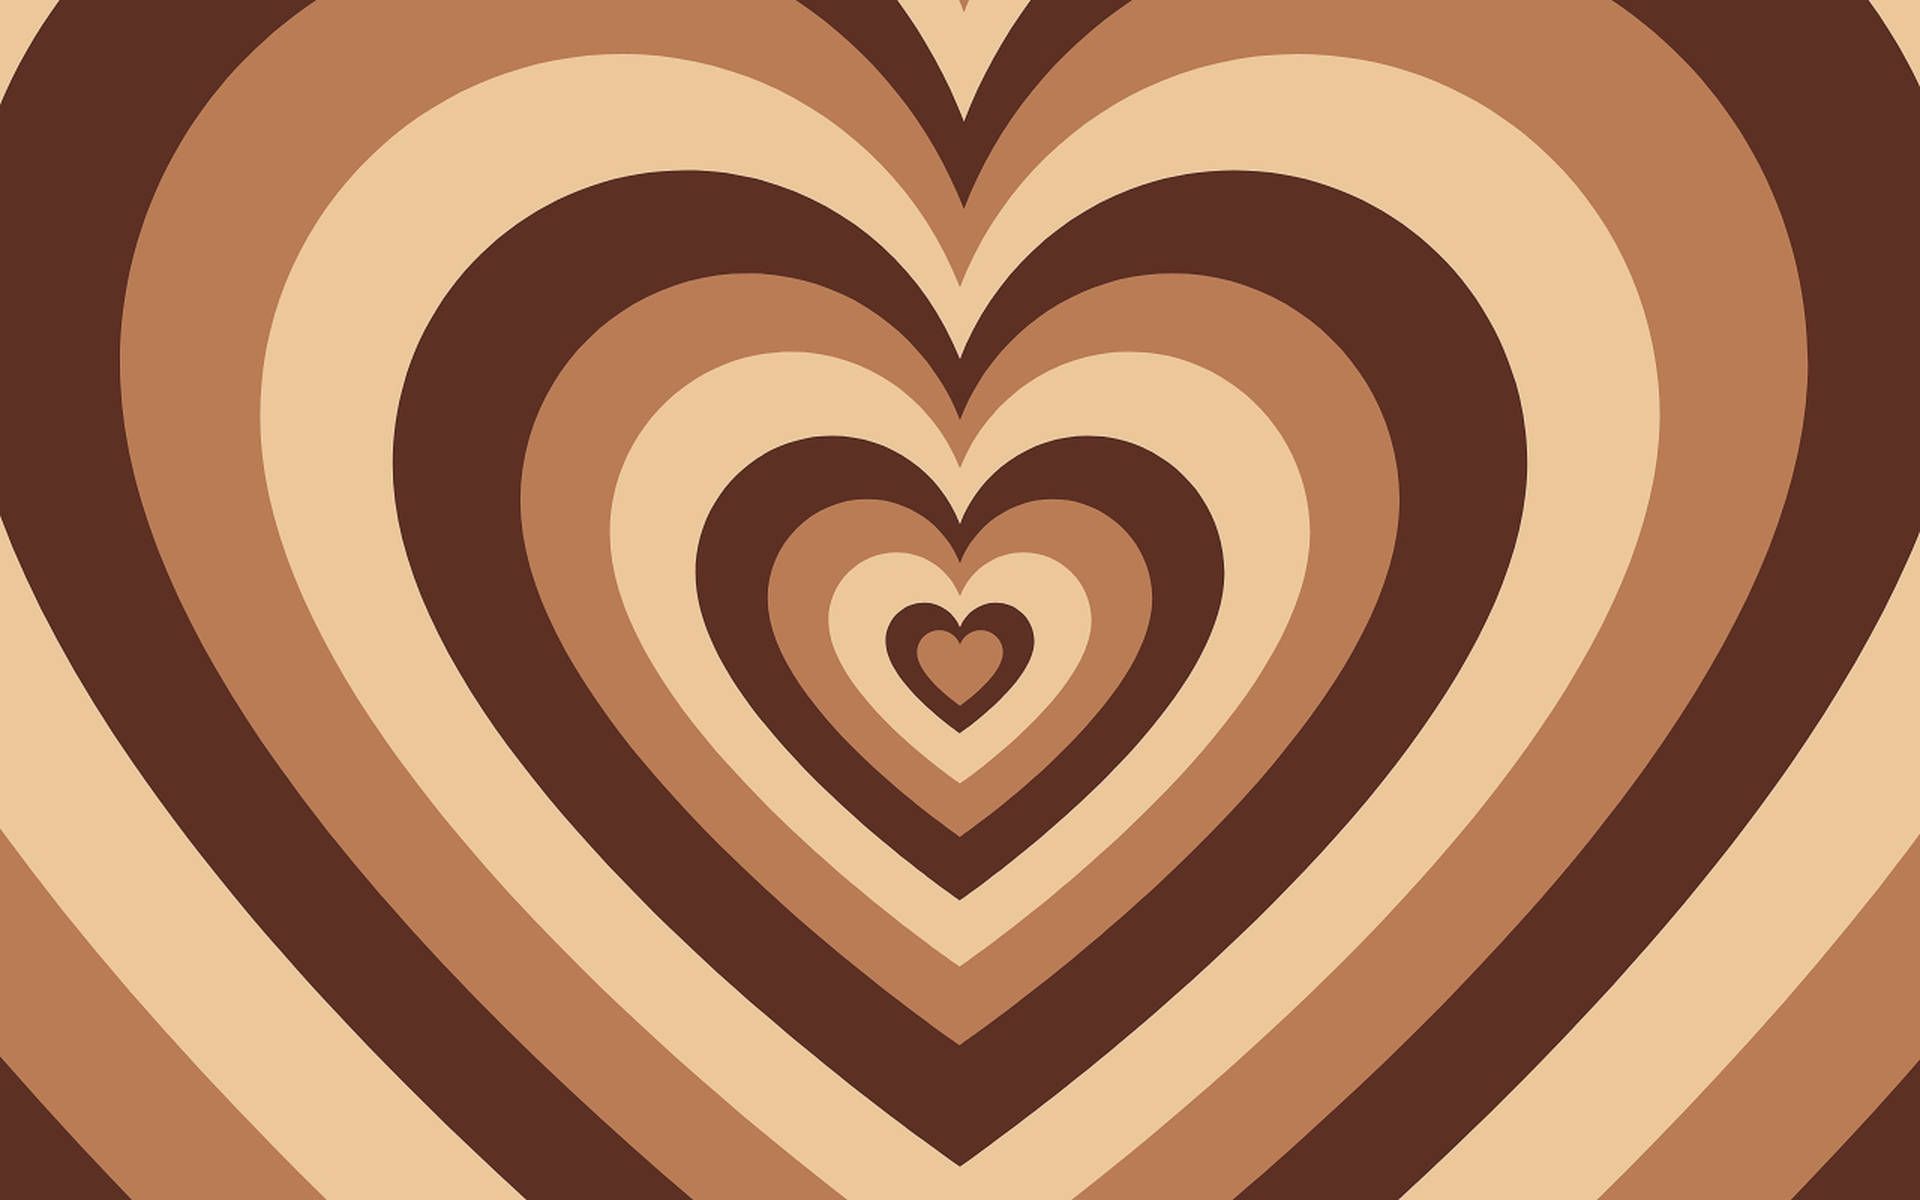 A heart made up of smaller hearts, all in different shades of brown. - Heart